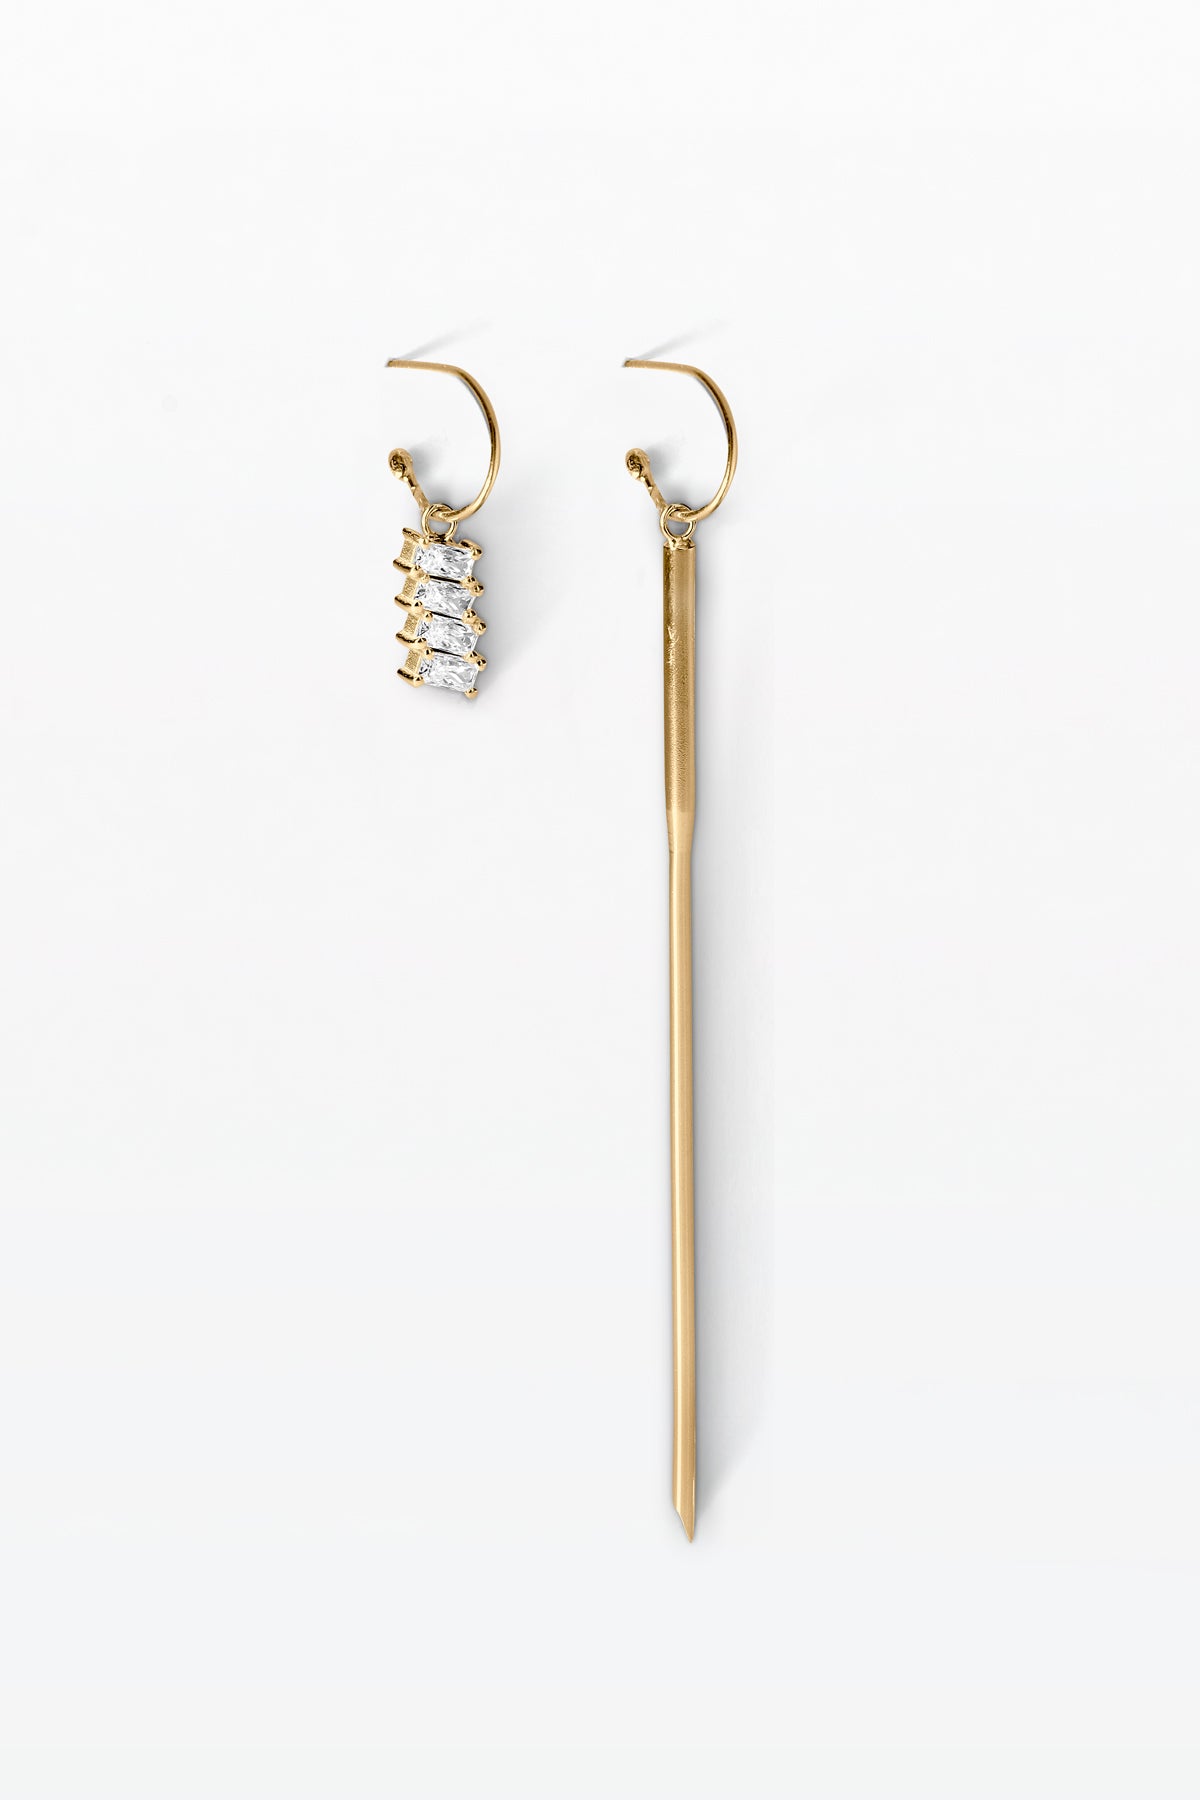 Summa Earring 02 Gold Plated Silver